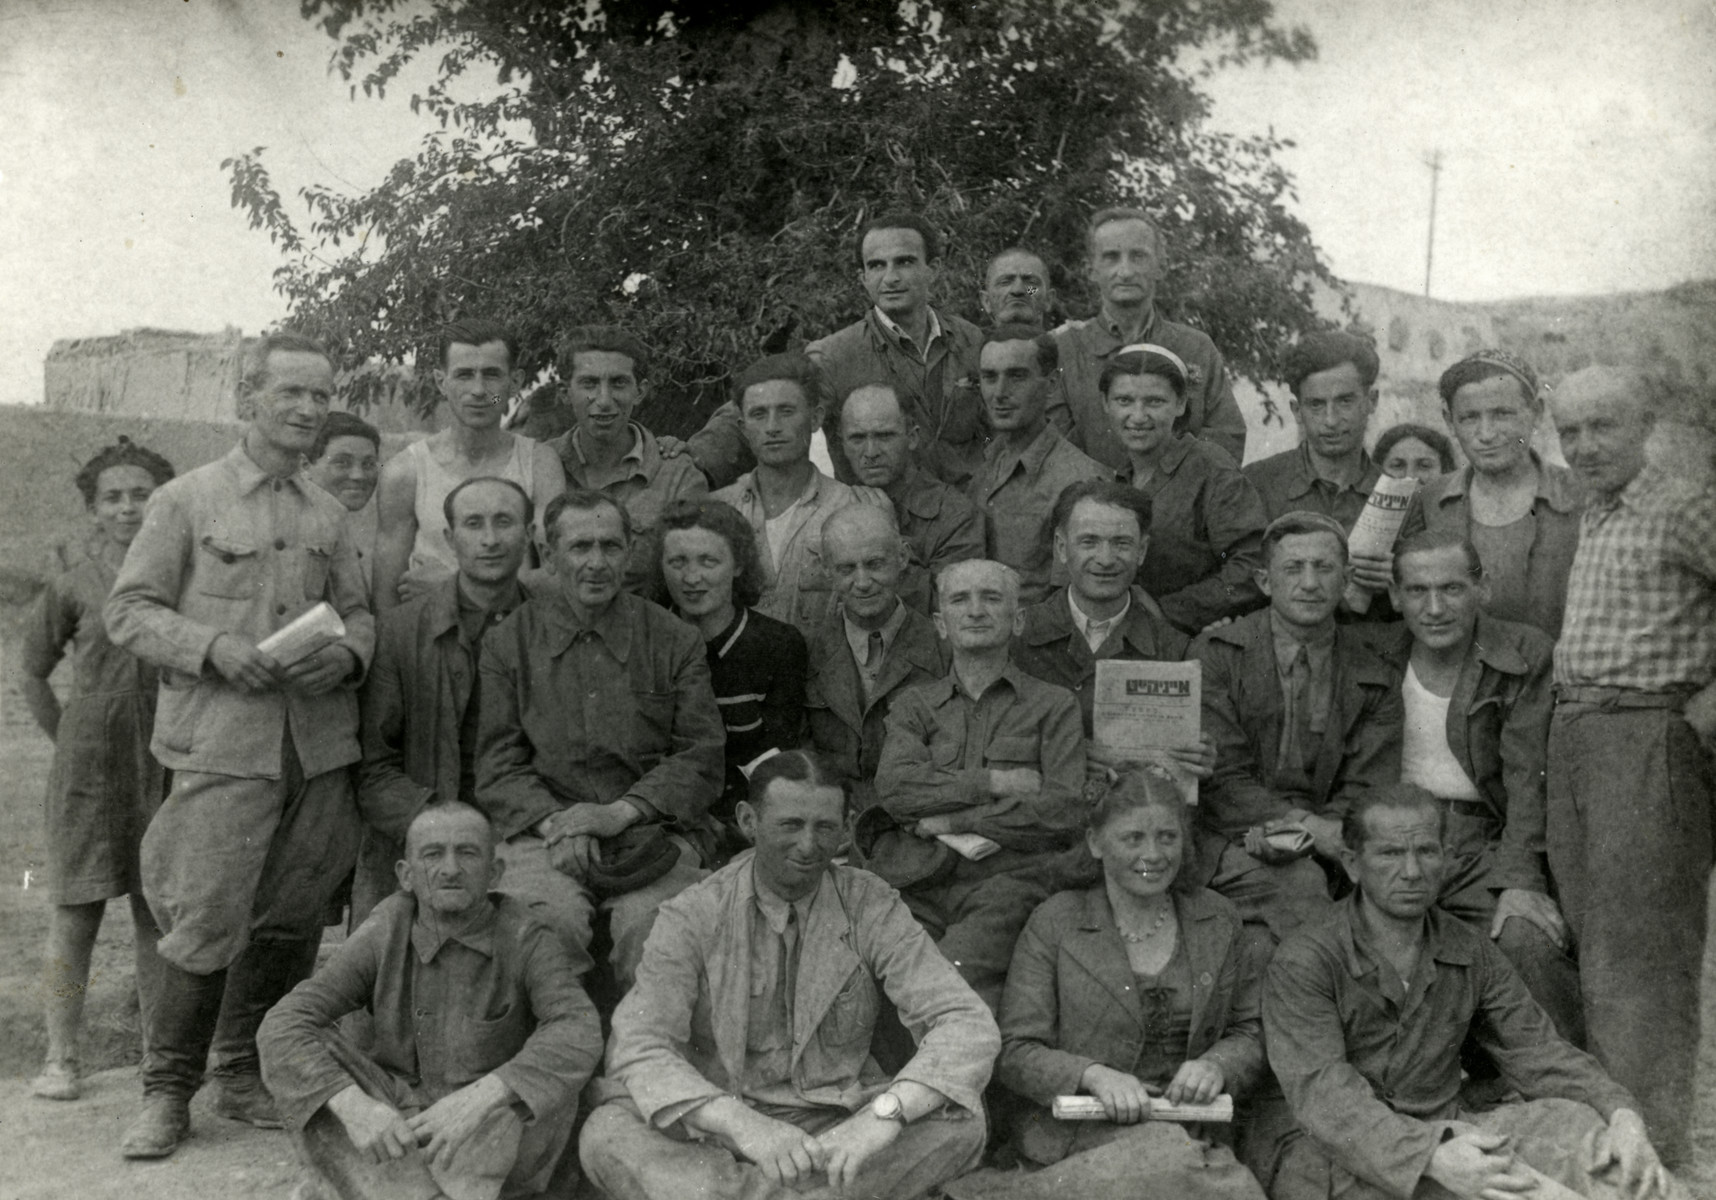 Group photograph iof Jewish refugees in Bukhara, some holding Yiddish newspapers.

Jonas Markowicz and Abraham Levine are sitting on the right of the second row.